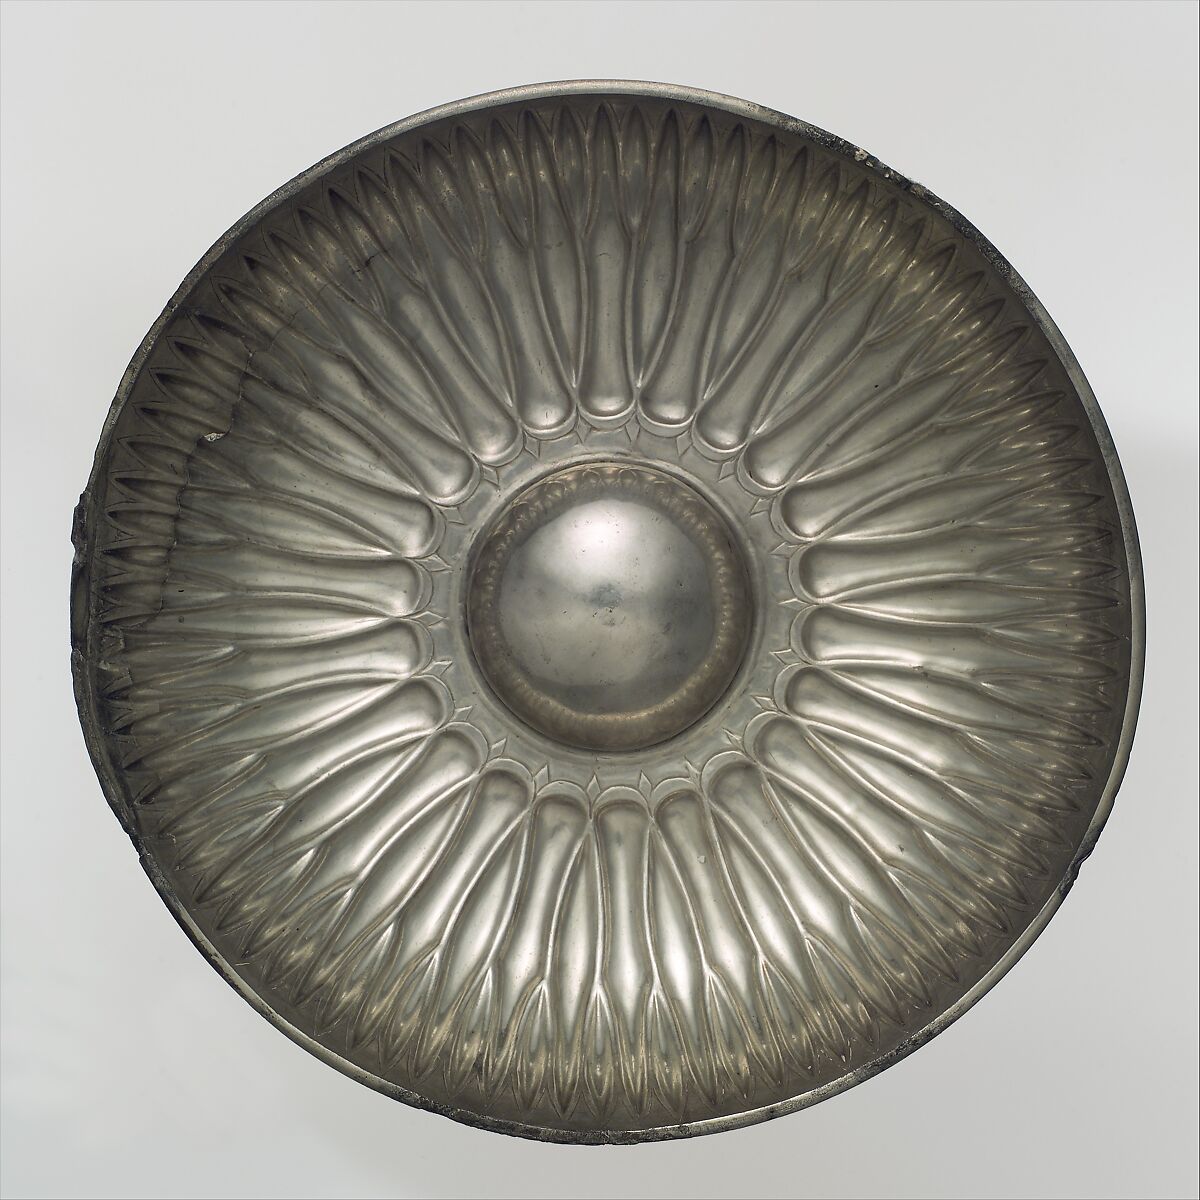 Bowl with a radiating petal design, Silver, Phrygian or Lydian 